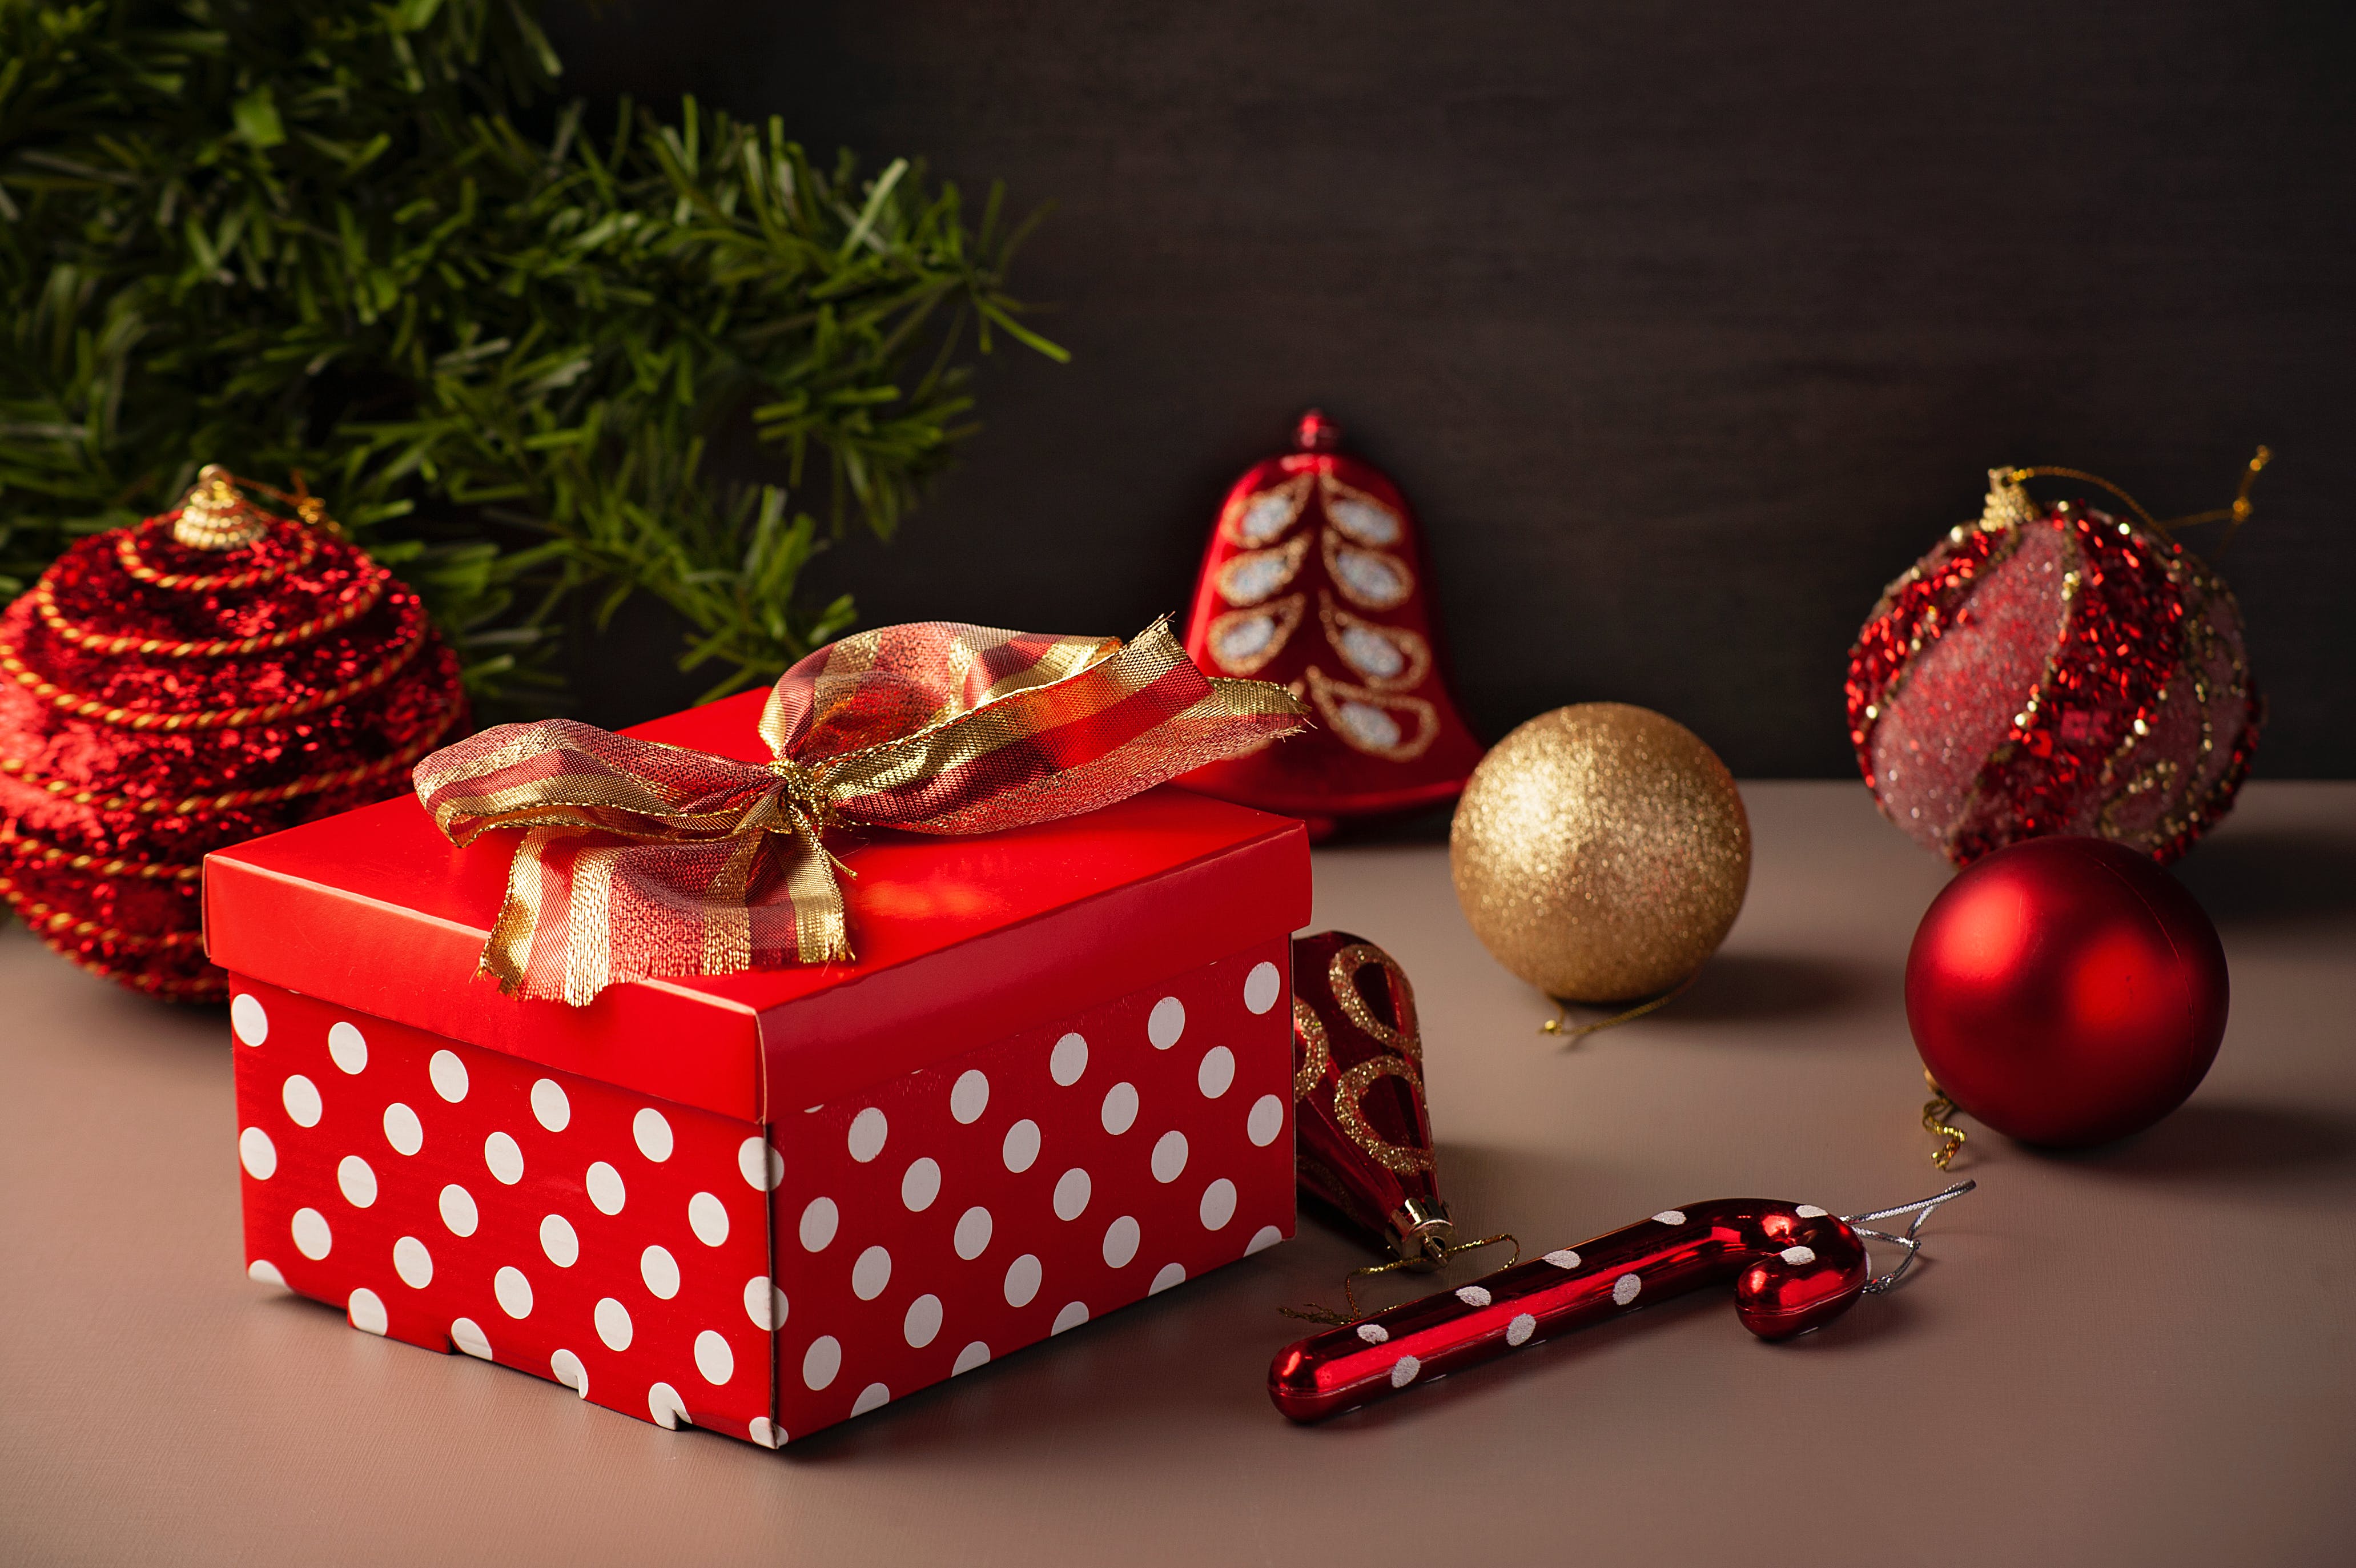 A wrapped present | Source: Pexels